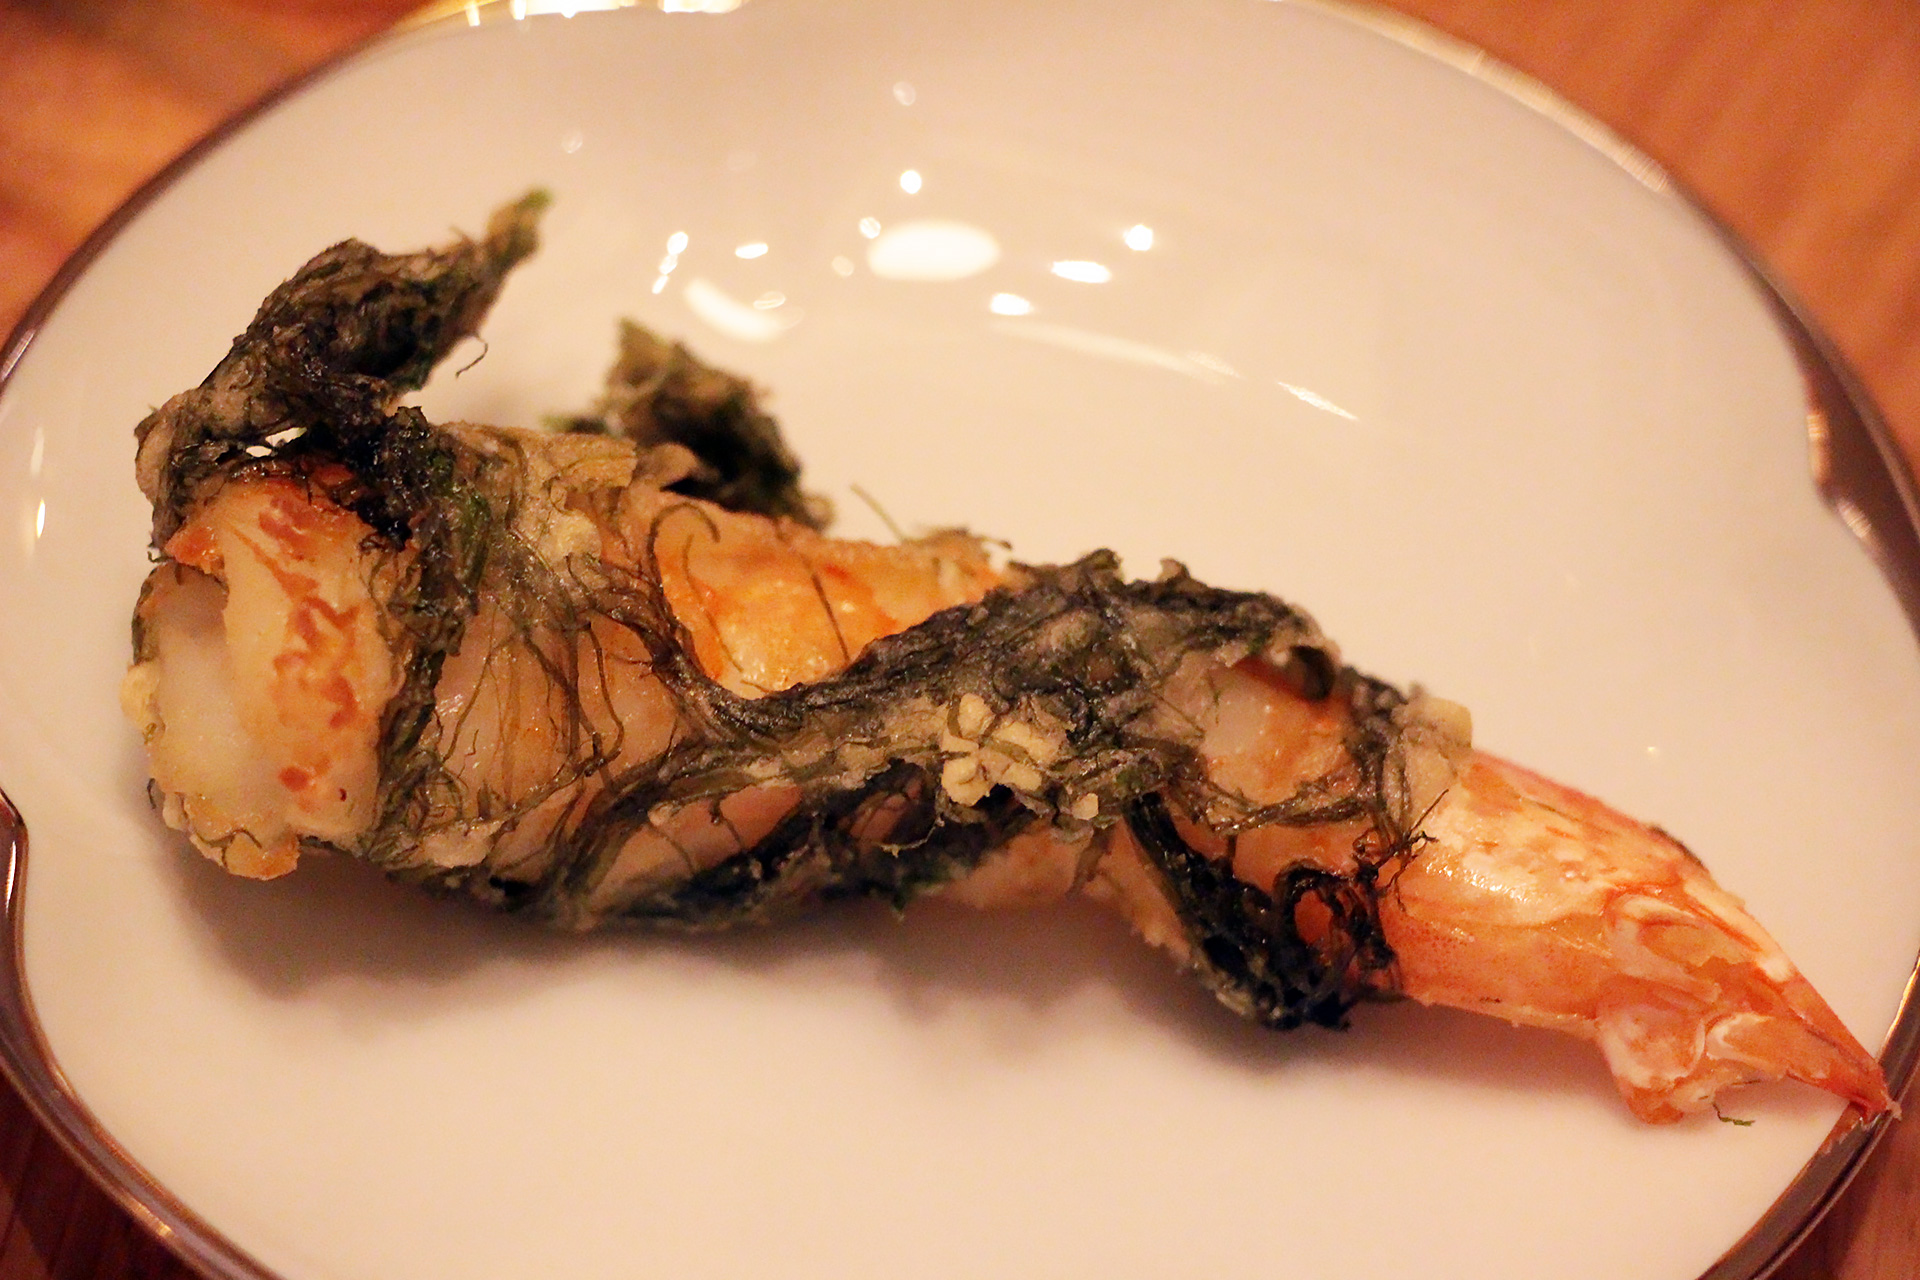 Fried shrimp wrapped in sea grass.